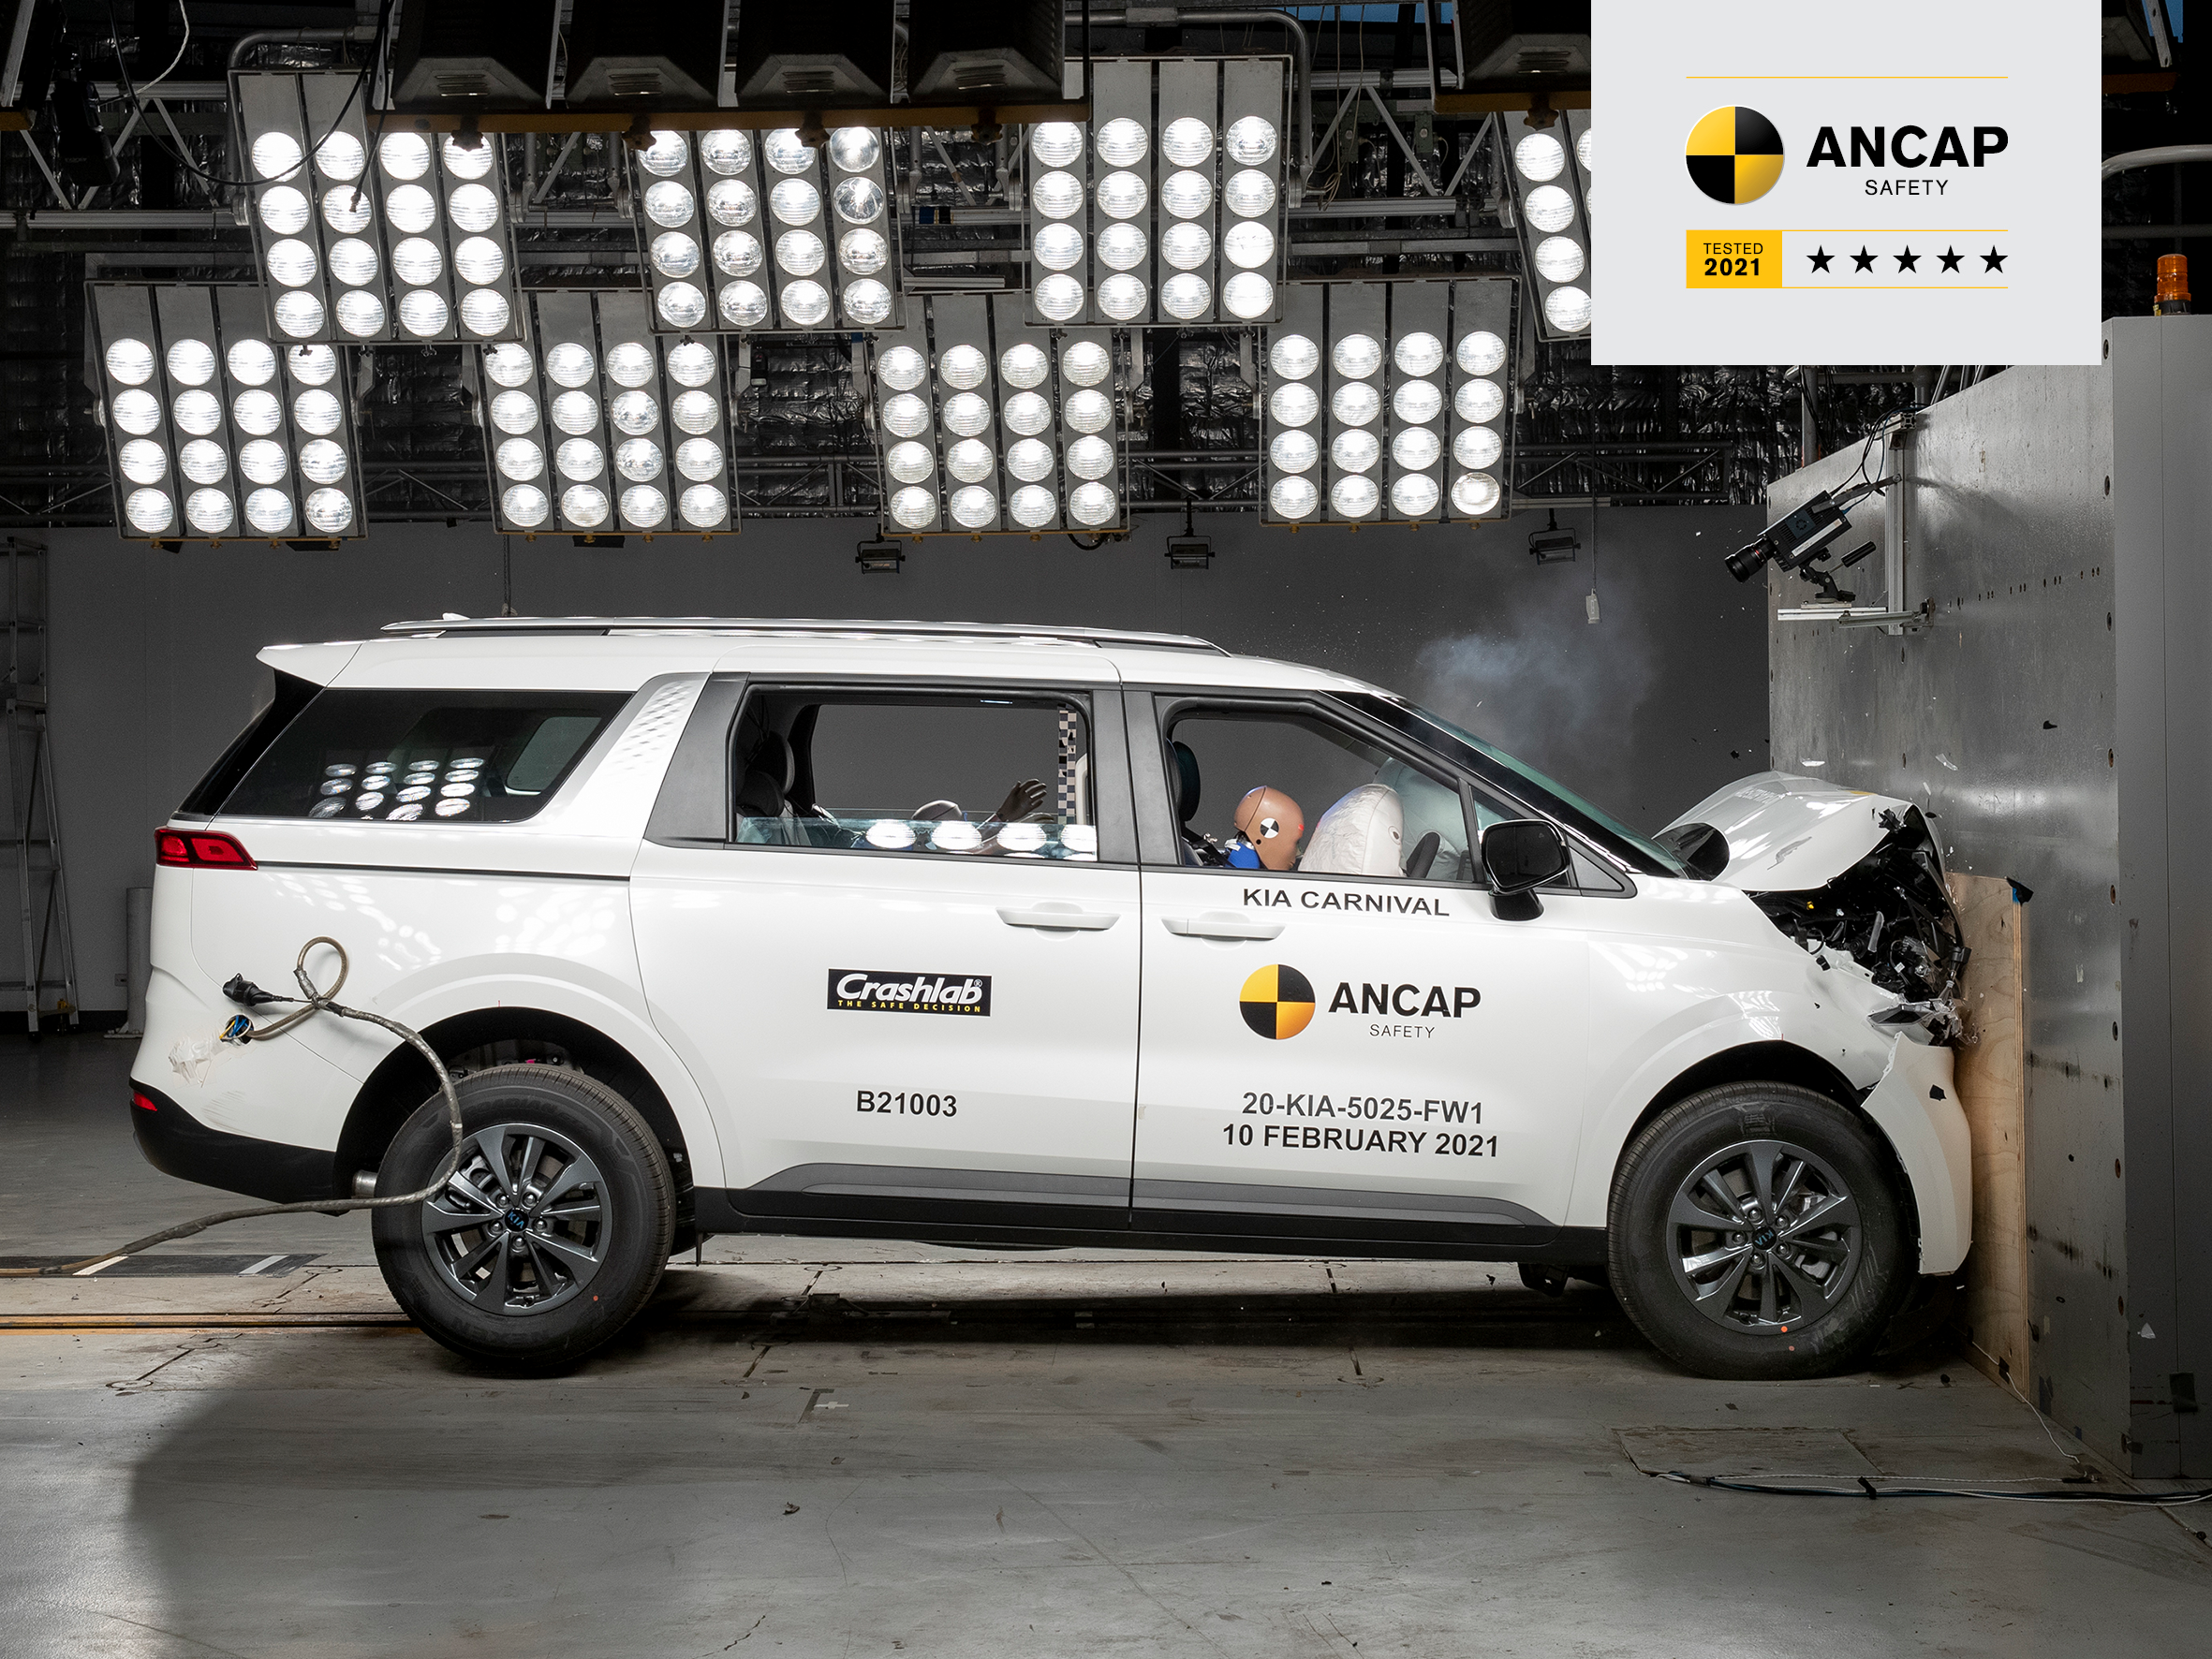 5-star safety outcome for the Kia Carnival